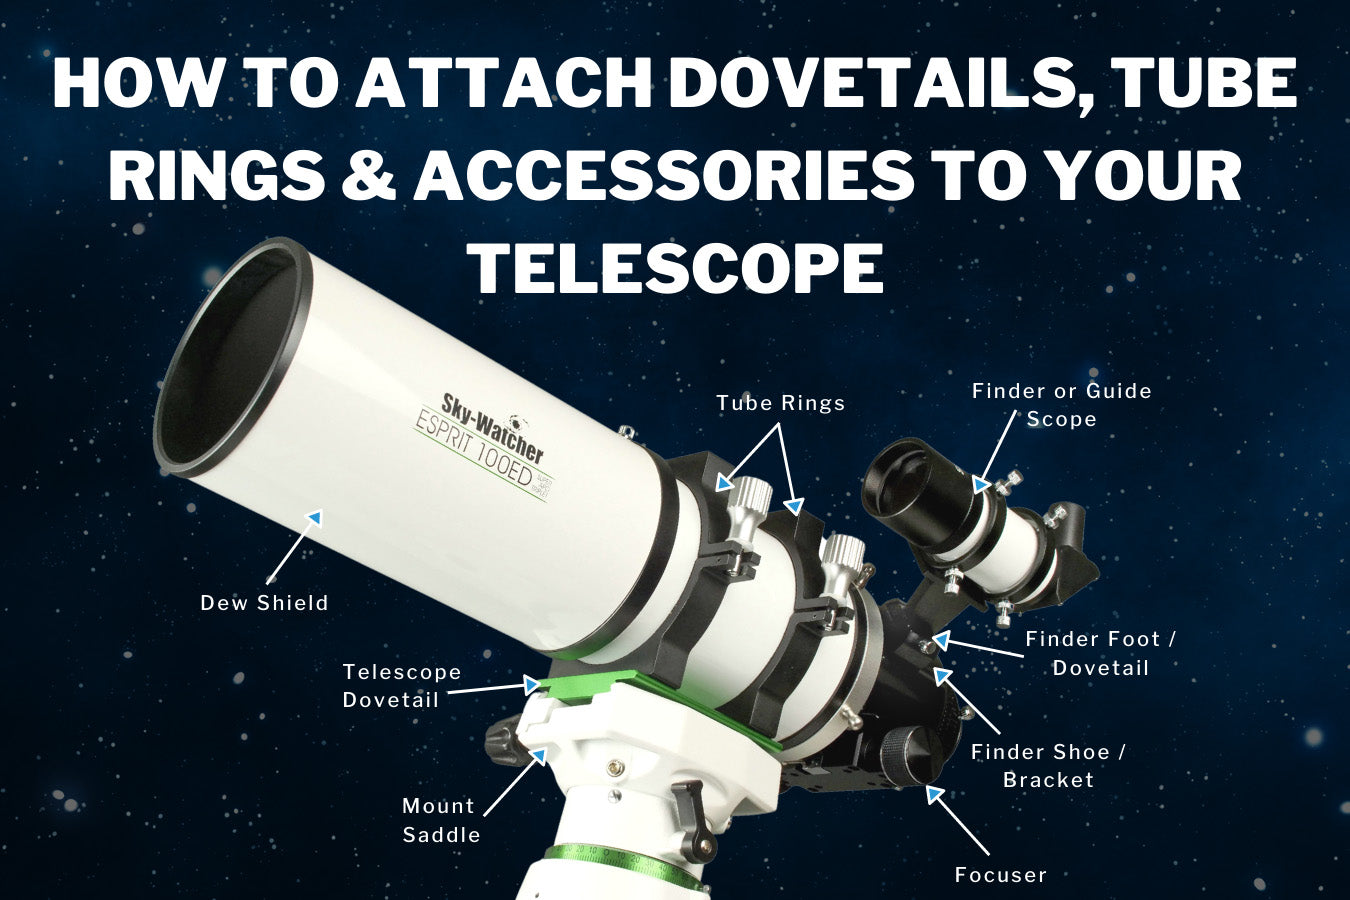 How to Attach Telescope Dovetails, Tube Rings & More Accessories